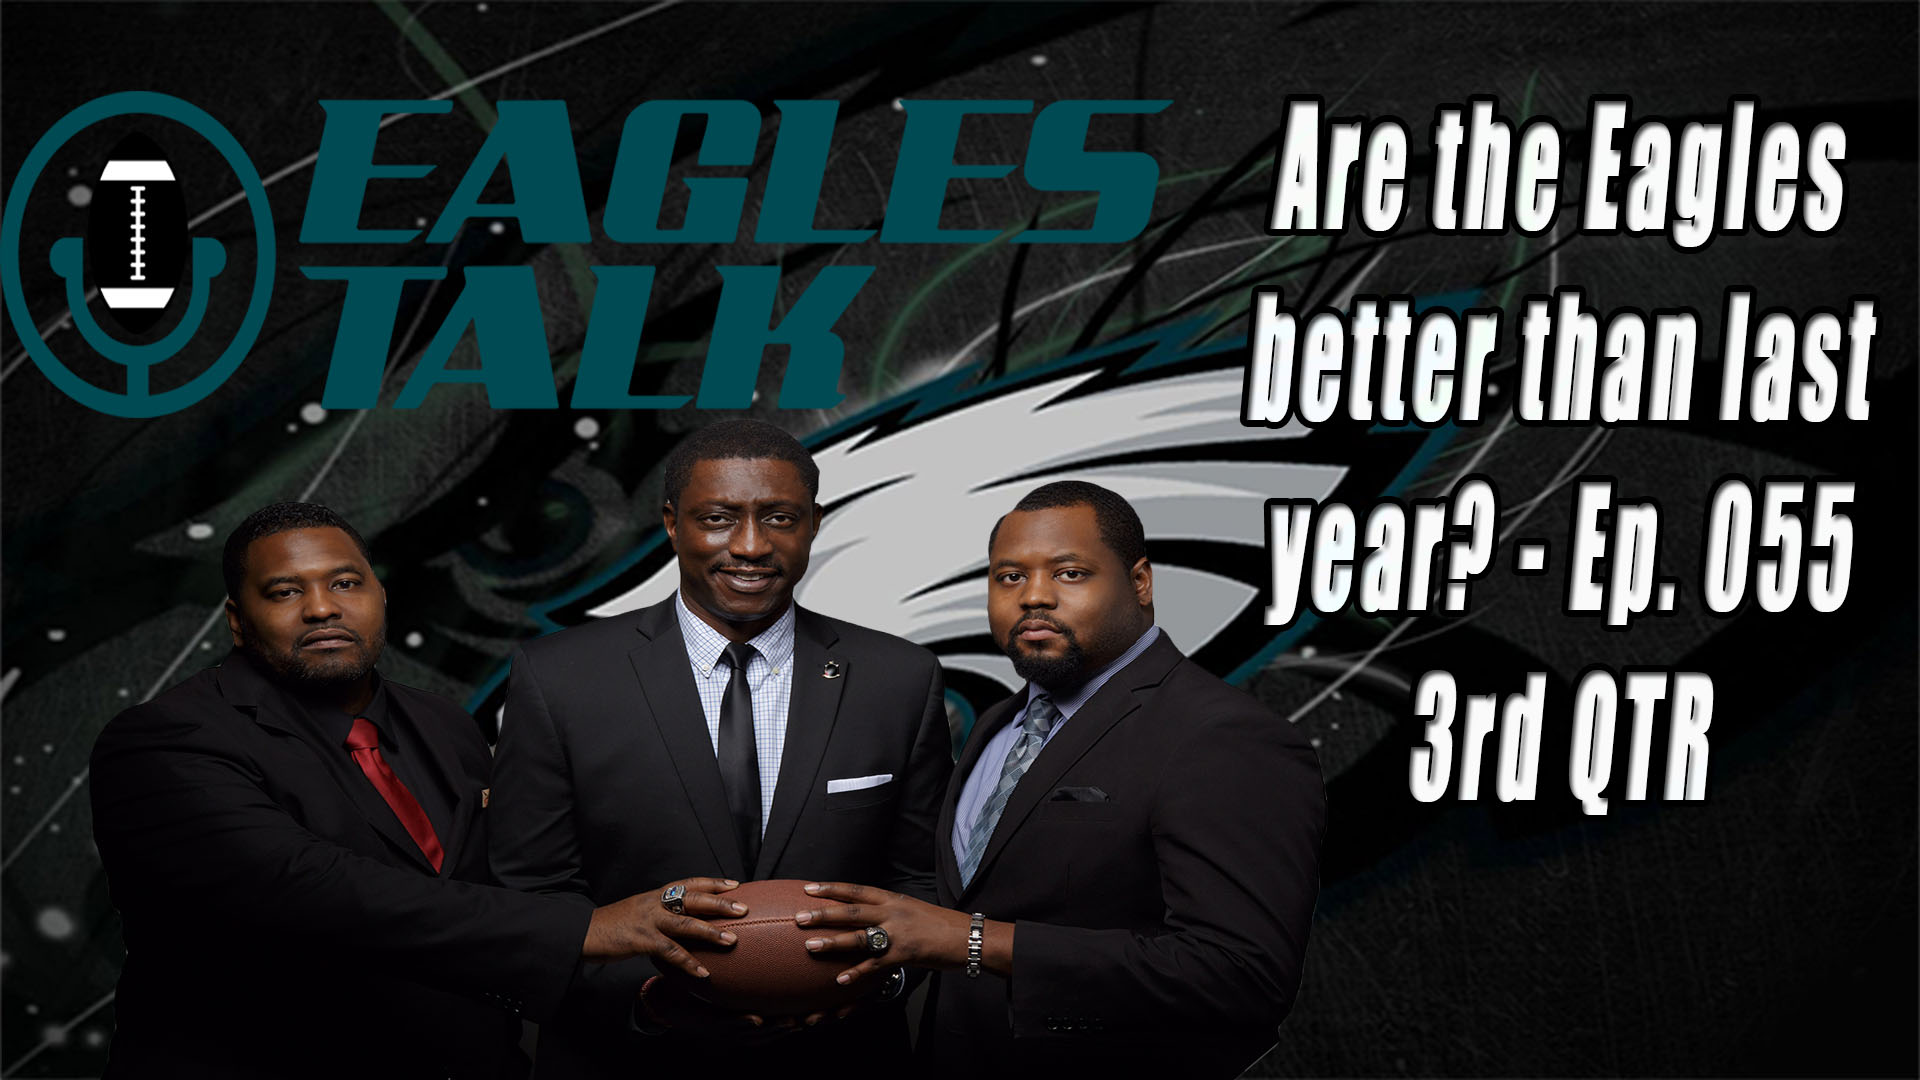 Eagles Talk Ep057: Are the Eagles better than last year? (3rd QTR)